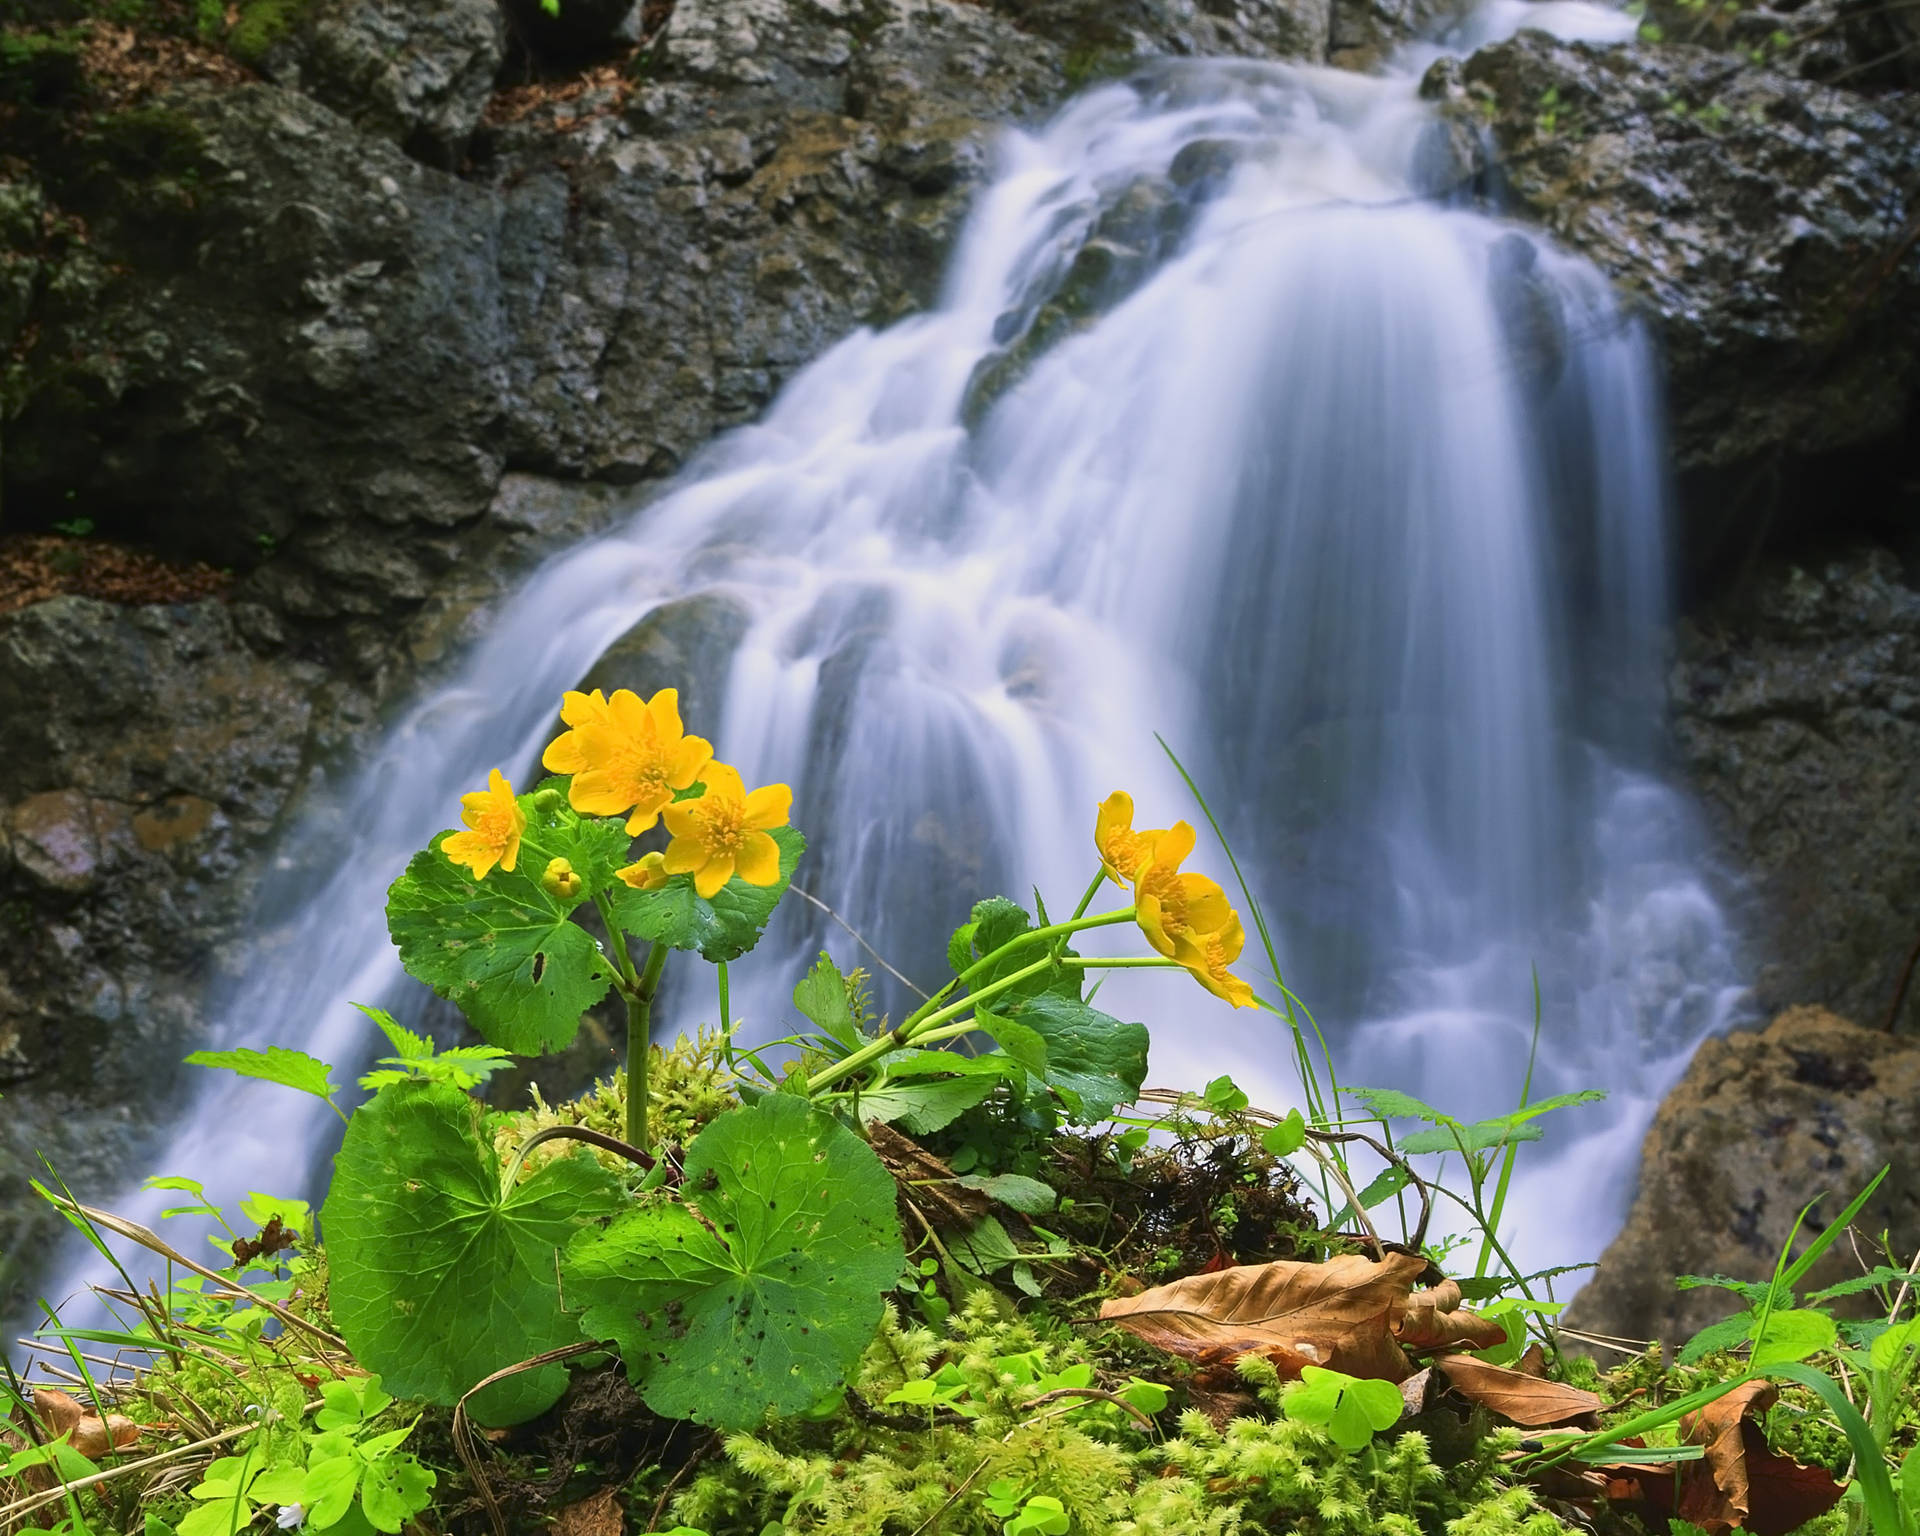 Enjoy the beauty of nature with a peaceful waterfall surrounded by blooming flowers Wallpaper